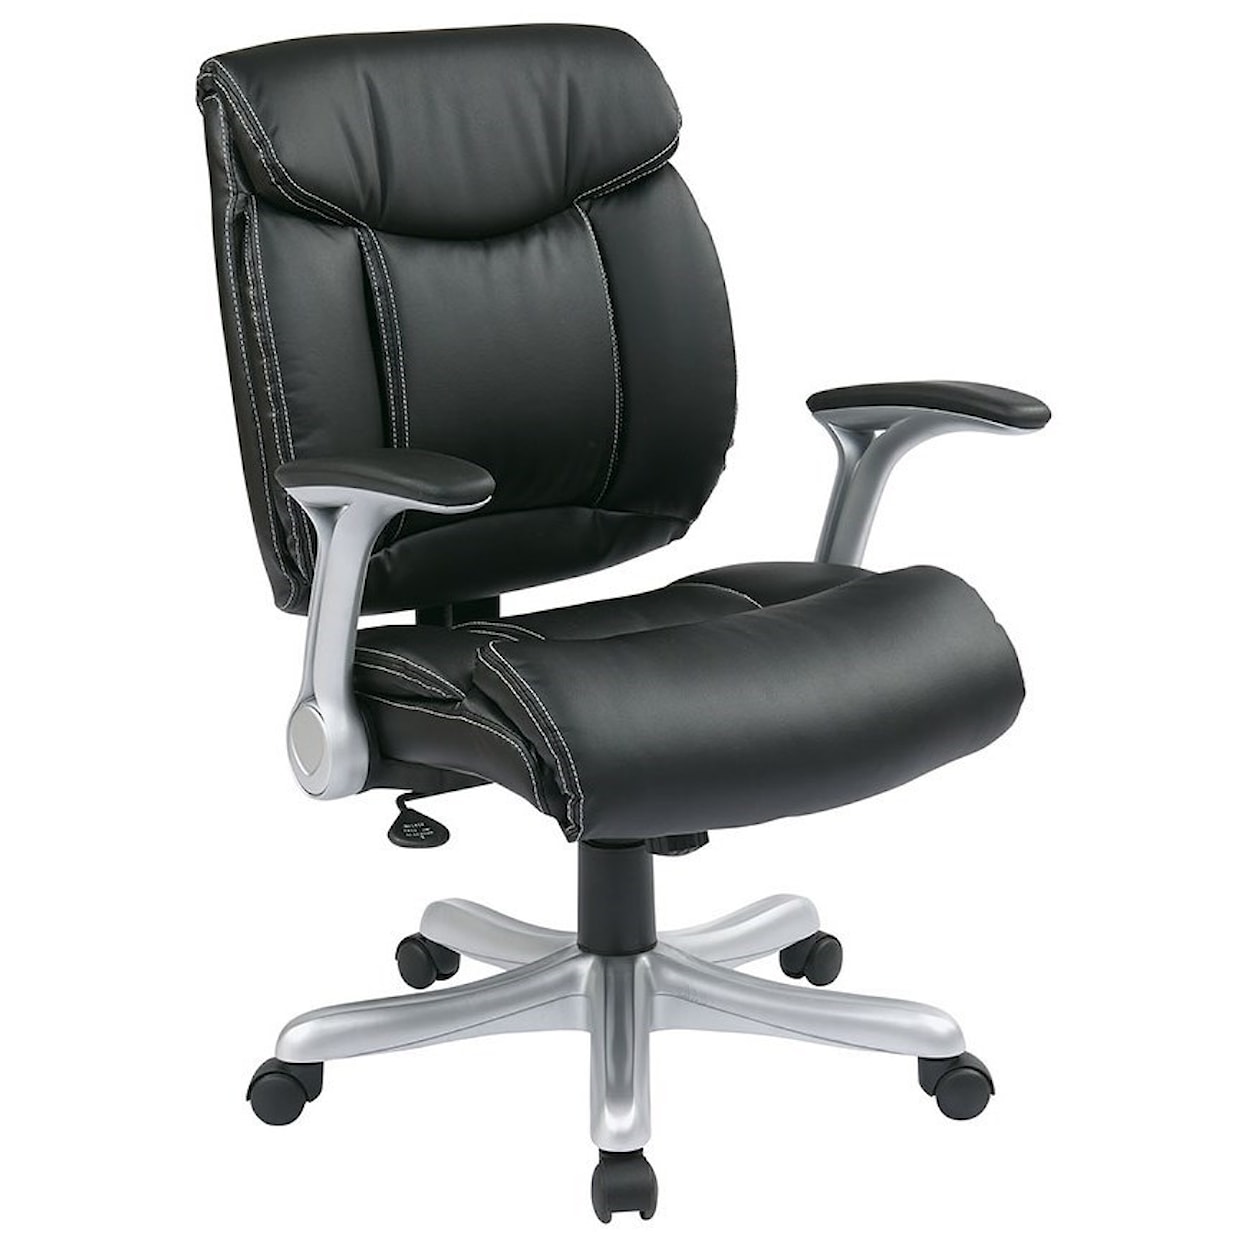 Office Star Office Chairs Executive Bonded Leather Chair